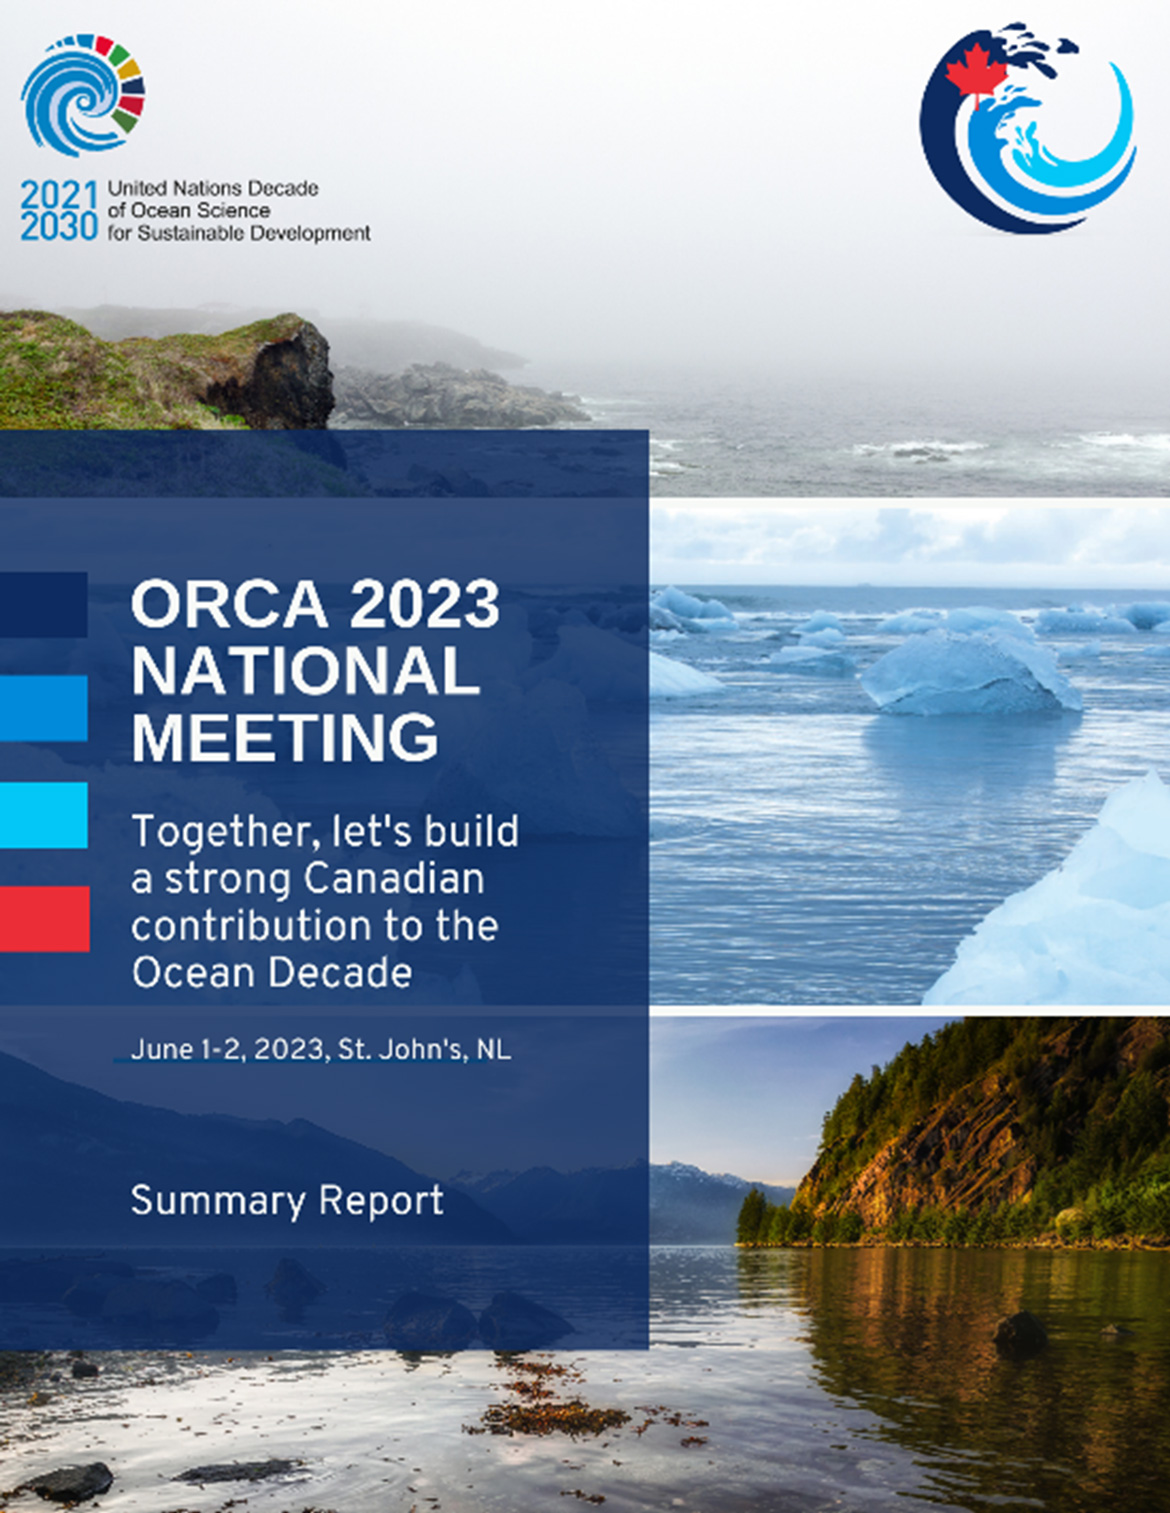 ORCA 2023 National Meeting Summary Report cover, with the ORCA and Ocean Decade logos, and pictures of the ocean in Canada's three coasts.